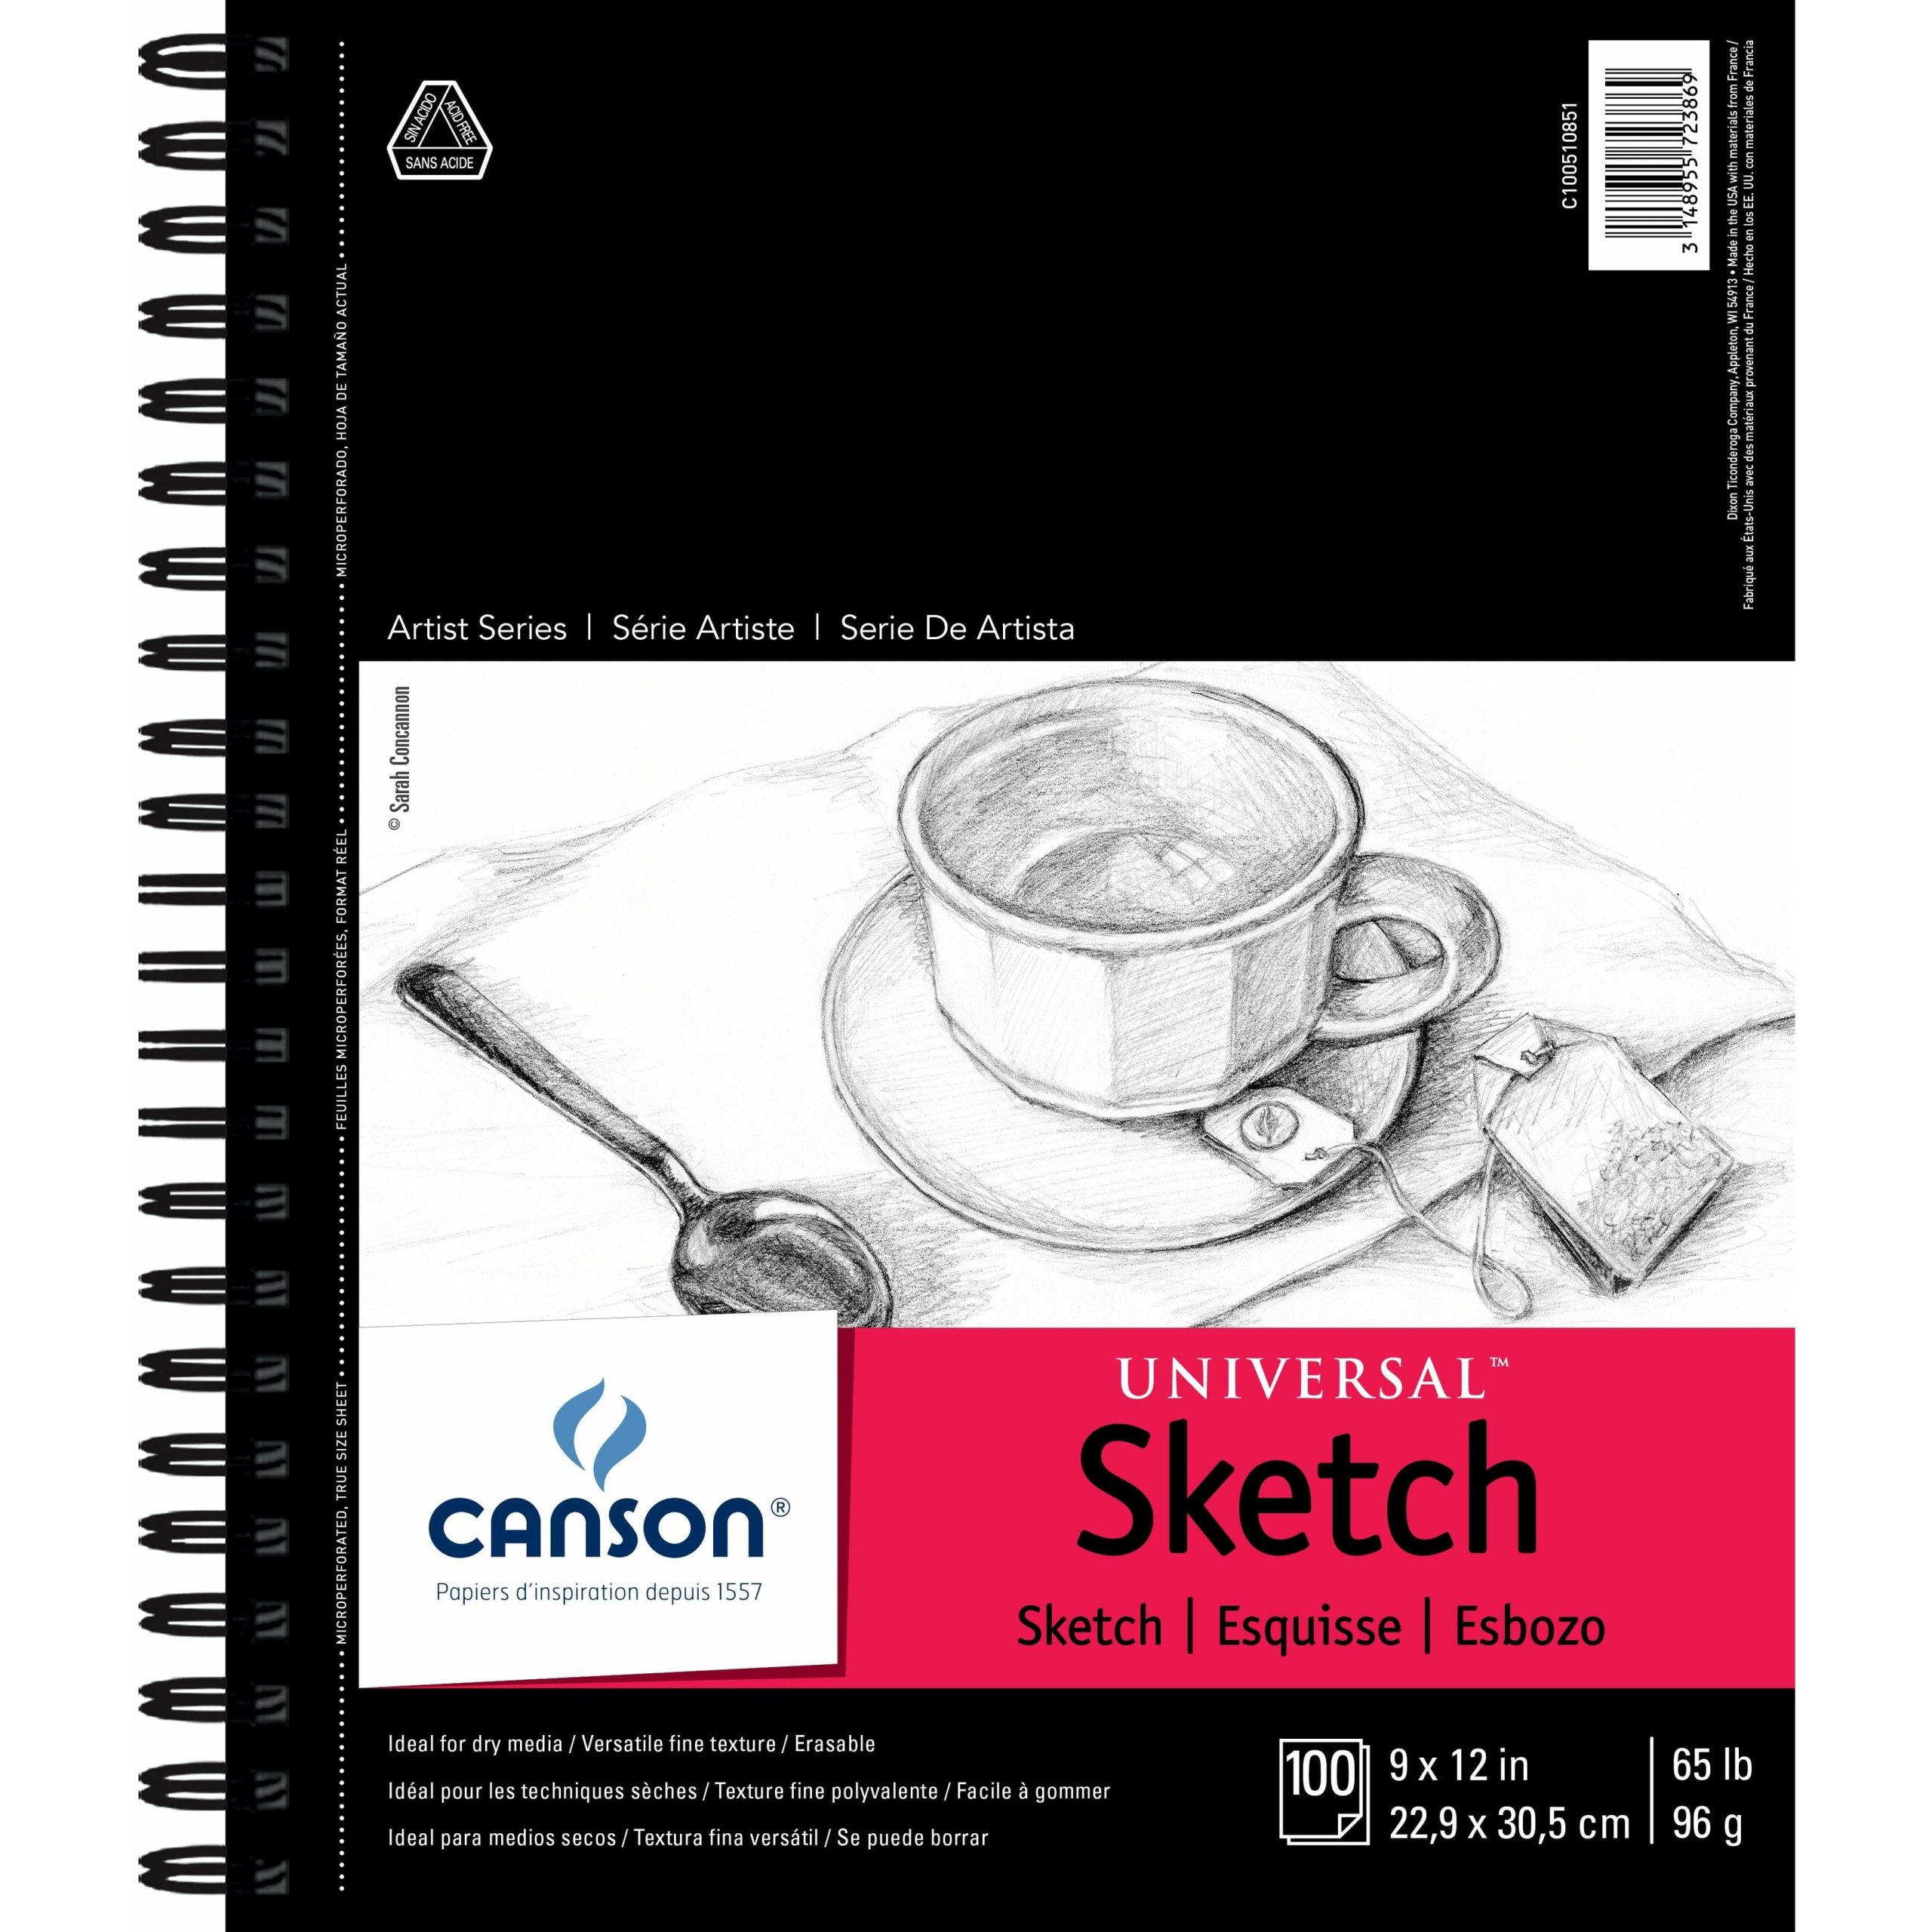 Canson Universal Spiral Sketch Book 9X12 - 100 Sheets 956 Stay